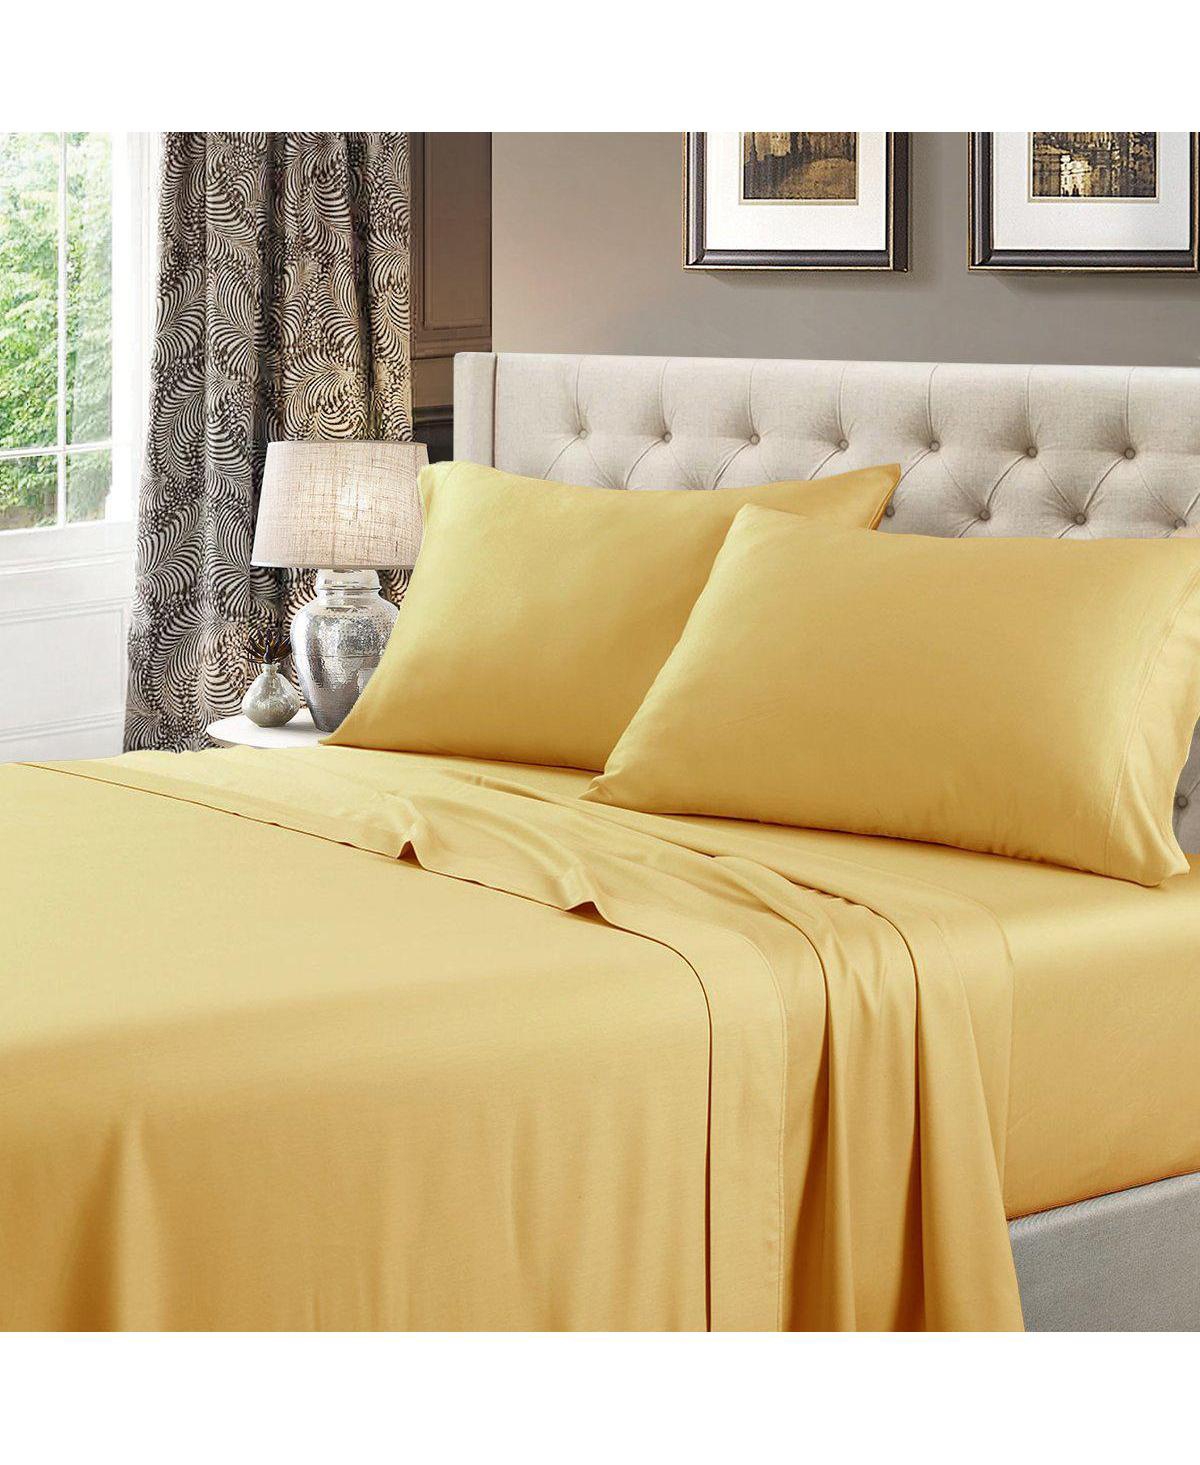 EGYPTIAN LINENS 600 THREAD COUNT SOLID COTTON SHEETS SET, KING